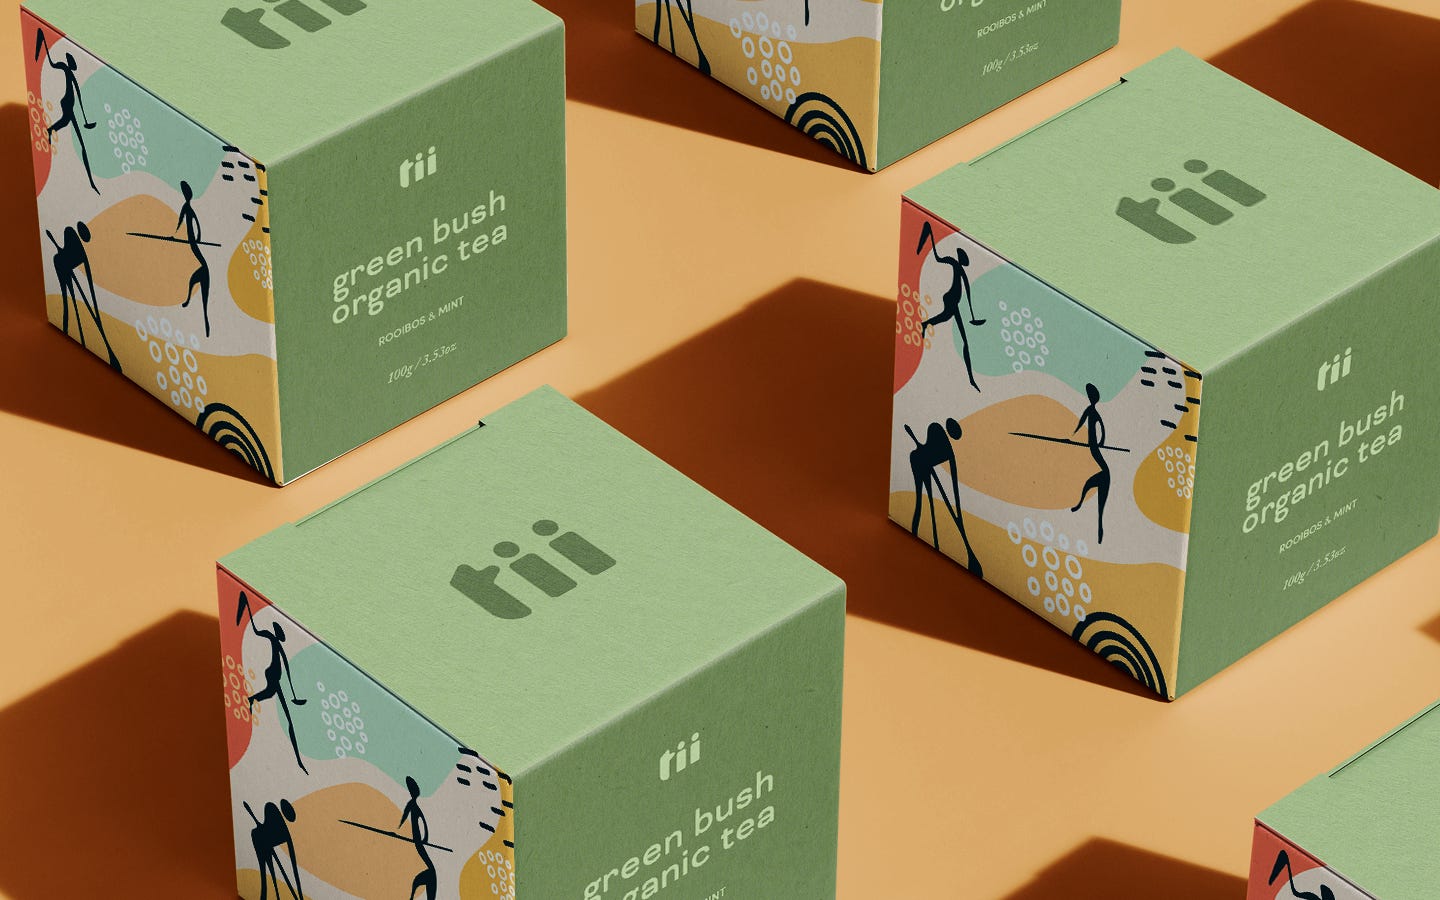 Tii Branding and Packaging by Fungi Dube